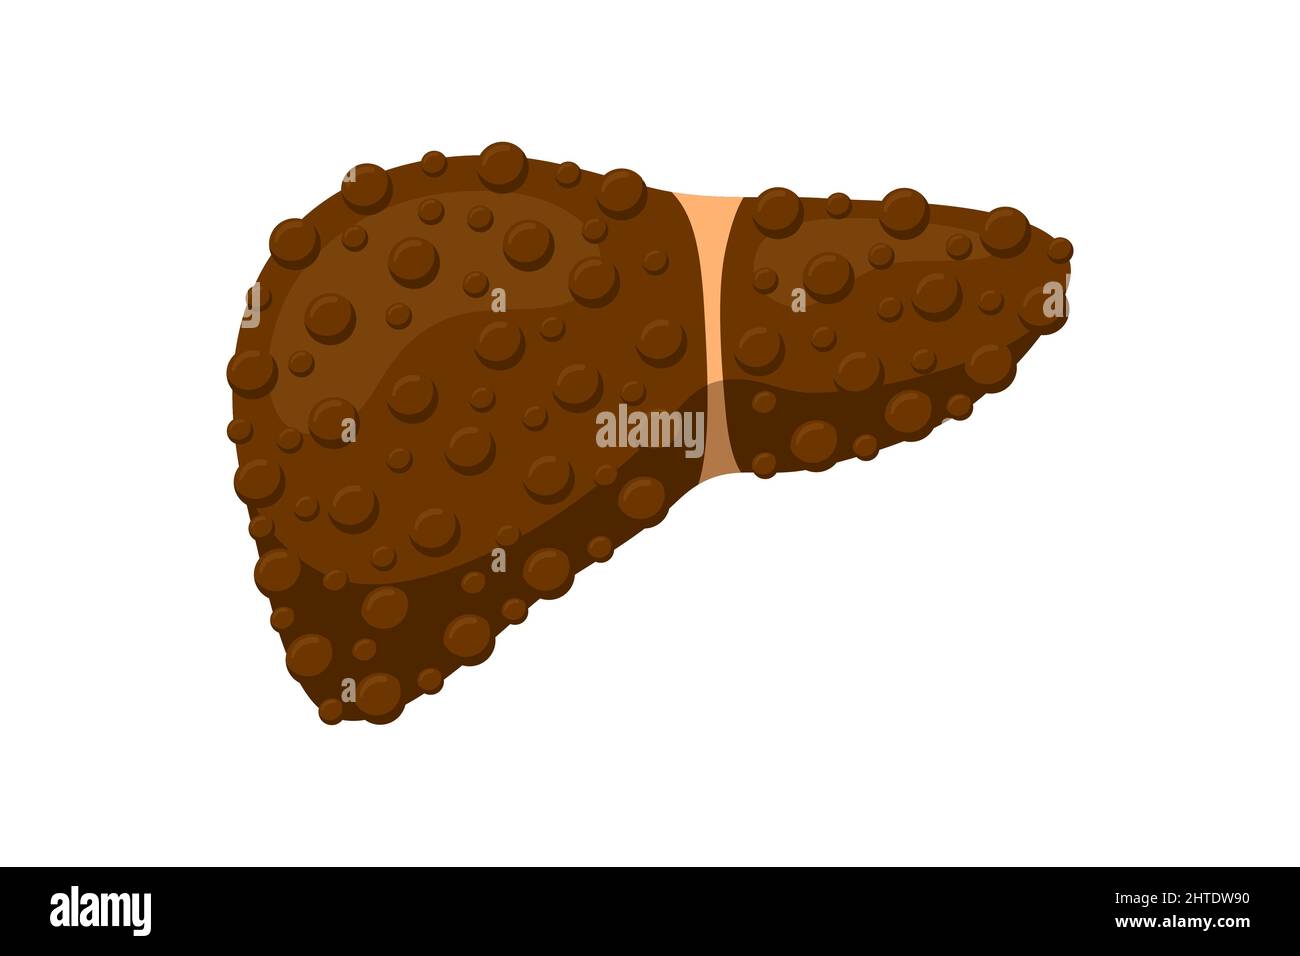 Sick unhealthy liver with cirrhosis or hepatitis. Damaged human exocrine gland internal organ destruction concept. Vector fatty hepatic eps isolated illustration Stock Vector